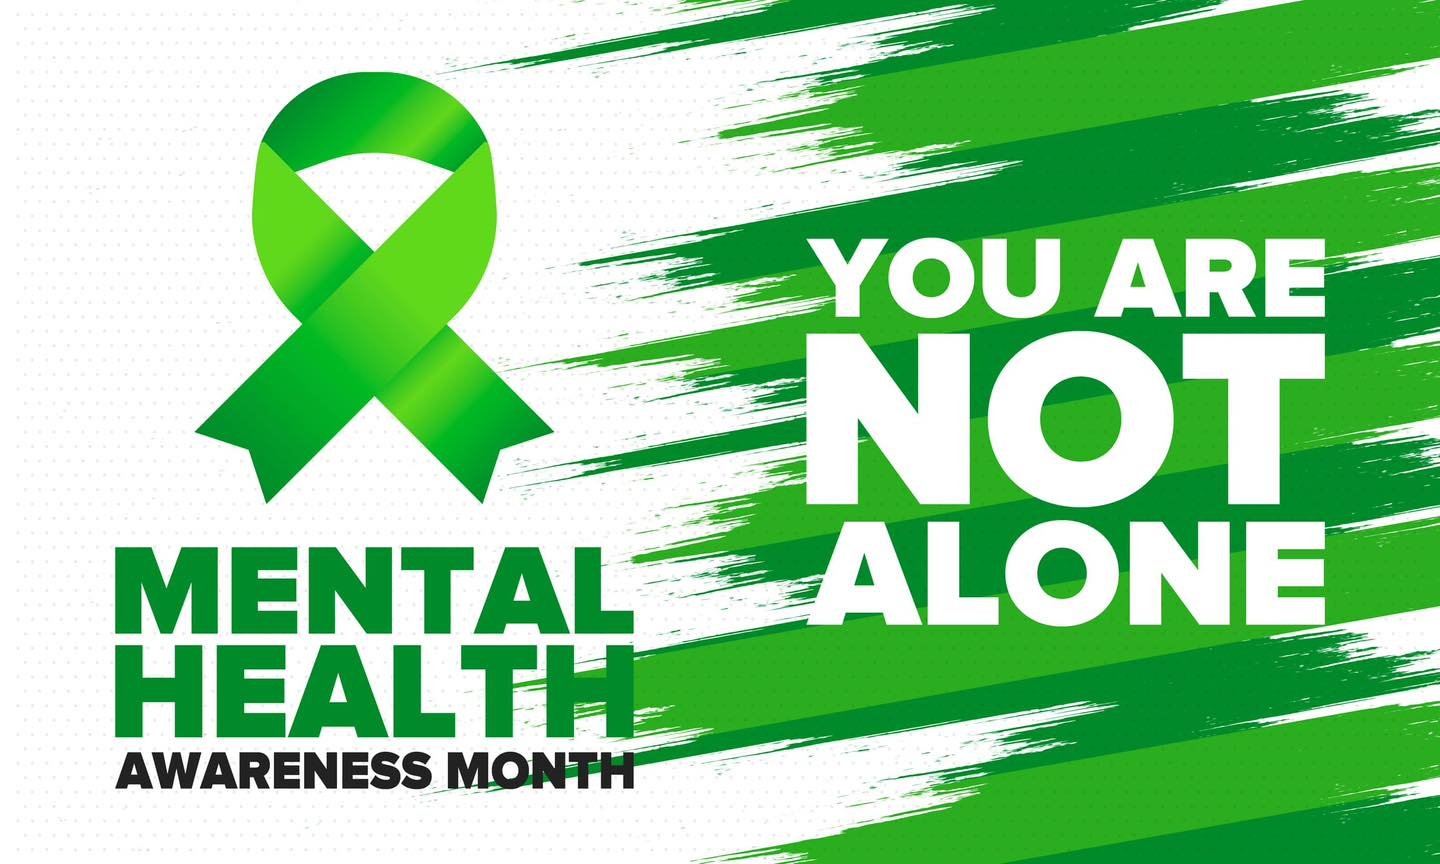 May is Mental Health Awareness Month, a time dedicated to raising awareness about mental health issues, reducing stigma, and promoting overall mental well-being. It's an opportunity to educate, advocate, and support those struggling with mental healt